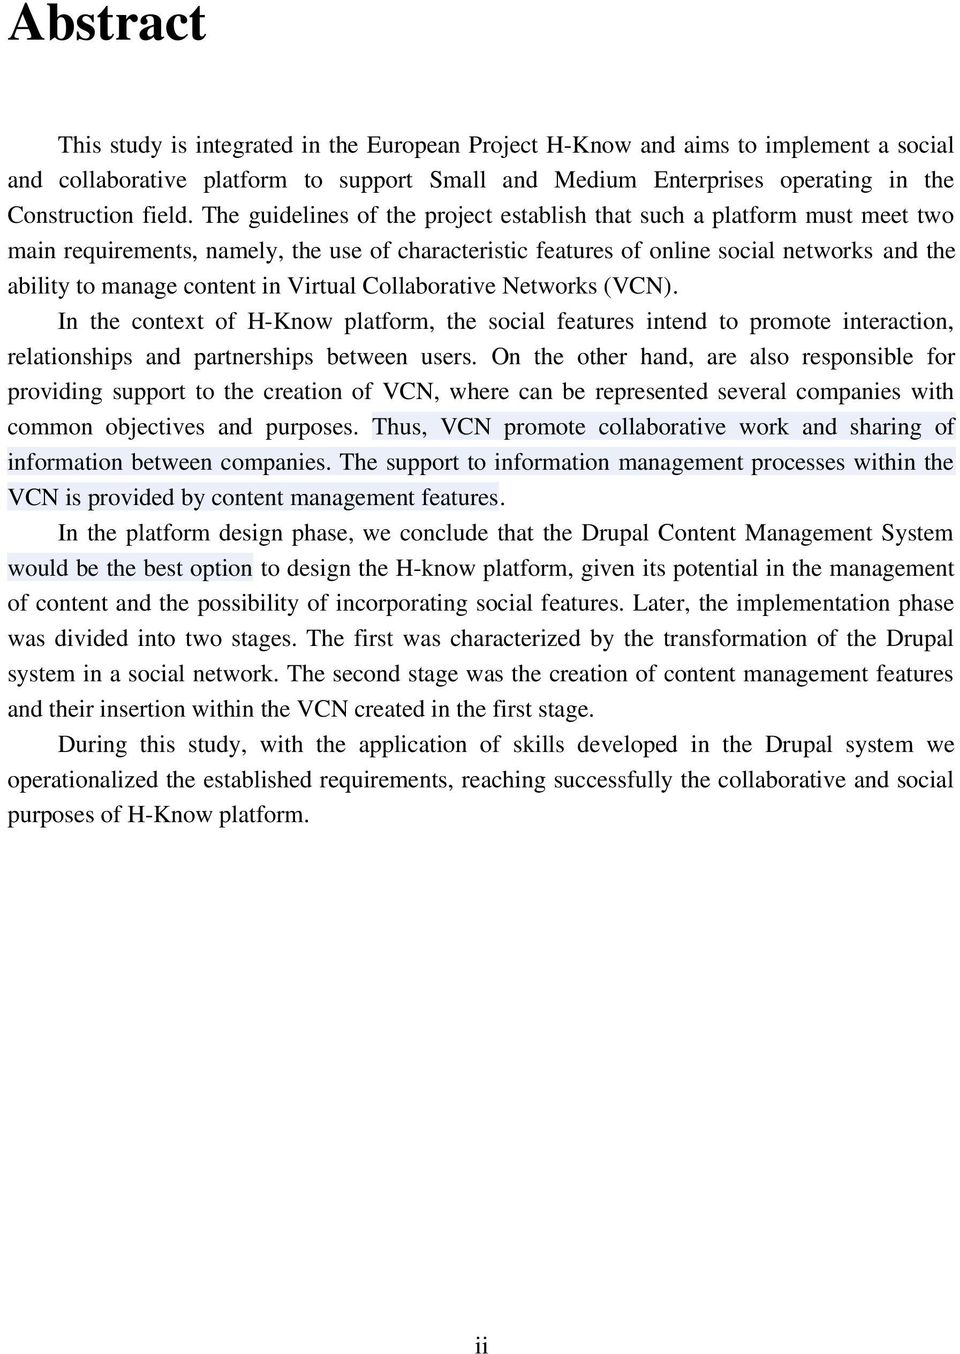 Virtual Collaborative Networks (VCN). In the context of H-Know platform, the social features intend to promote interaction, relationships and partnerships between users.